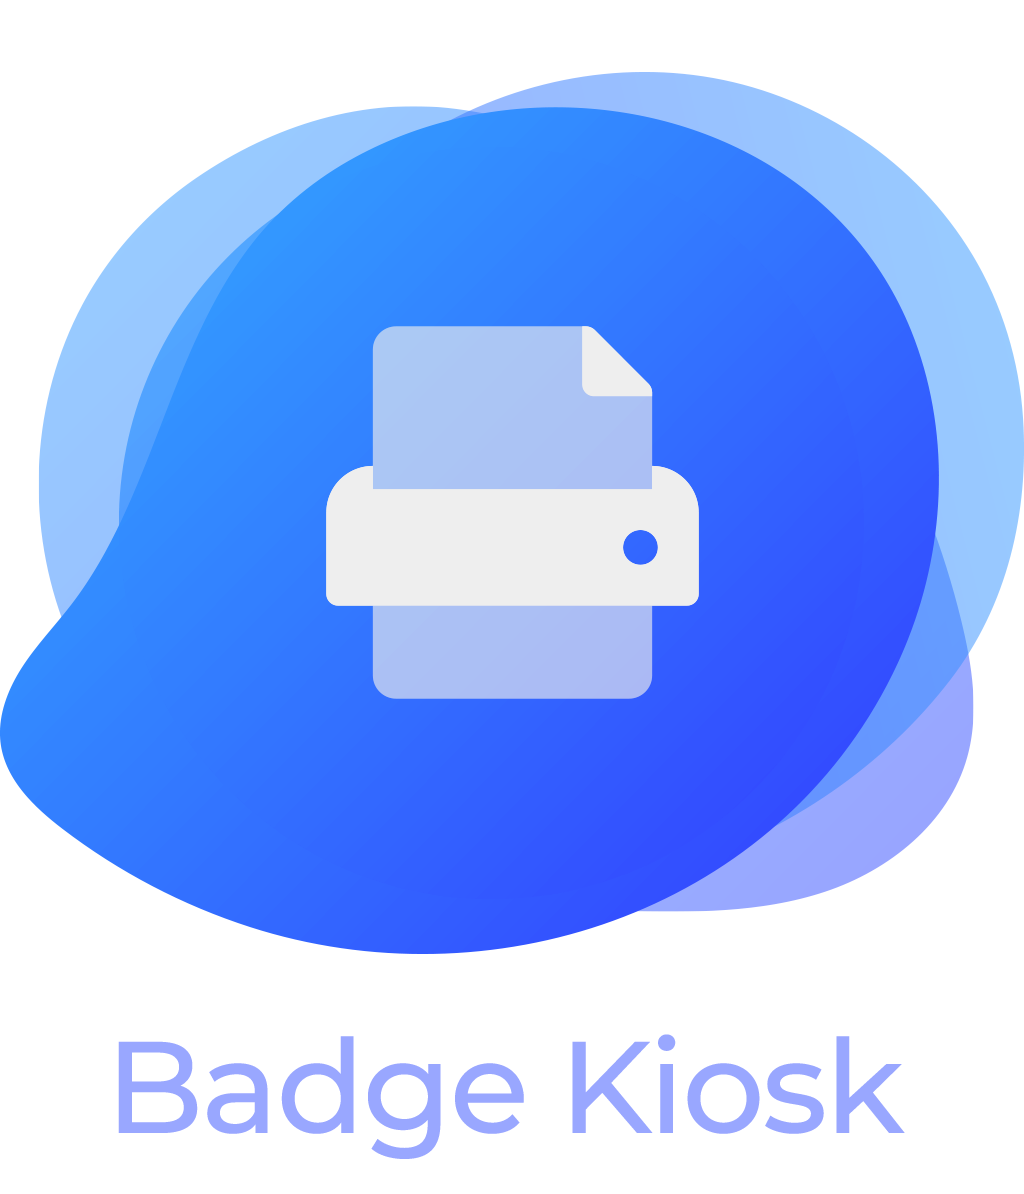 Frontdesk's Badge Kiosk app simplifies the badge printing process for attendee check-in at events.